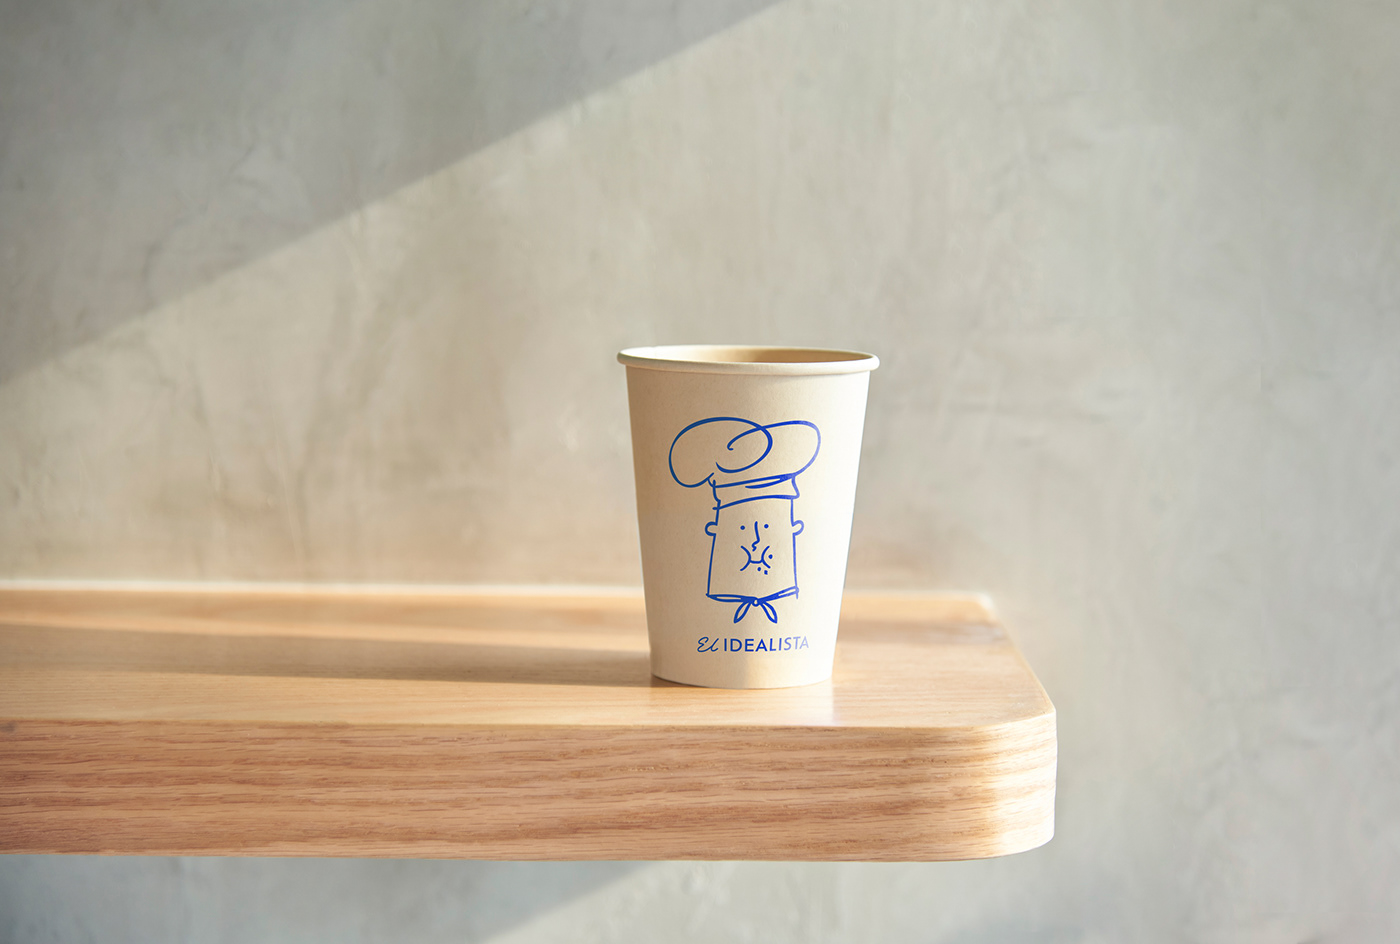 Coffee cup packaging with an illustration of El idealista
